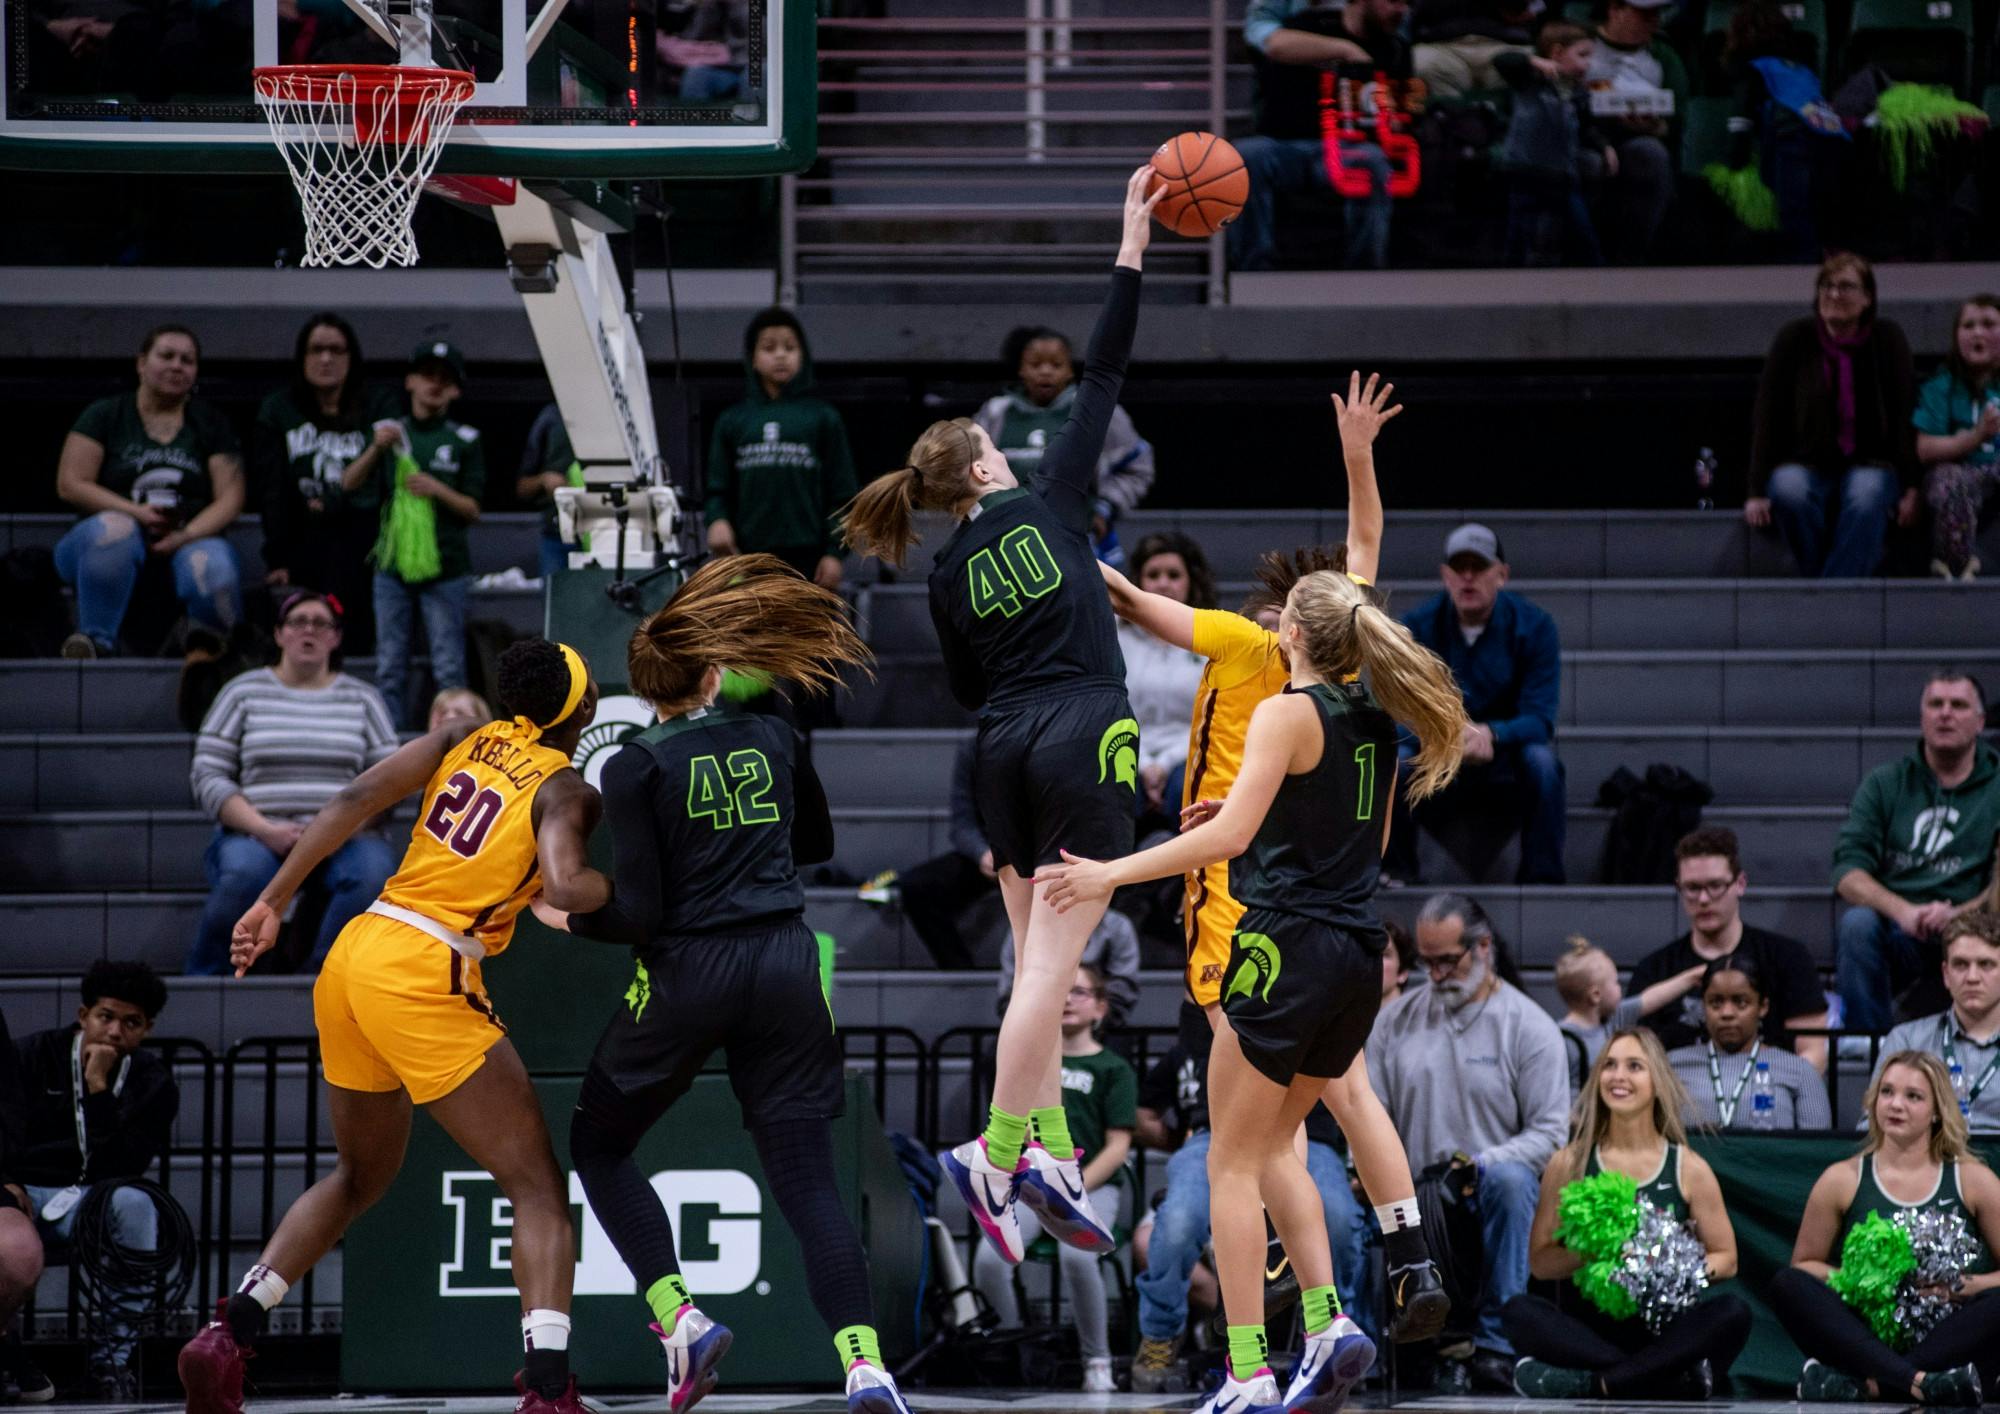 Freshman guard Julia Ayrault (40) swats away a shot during the game against Minnesota Feb. 17, 2020 at the Breslin Center.